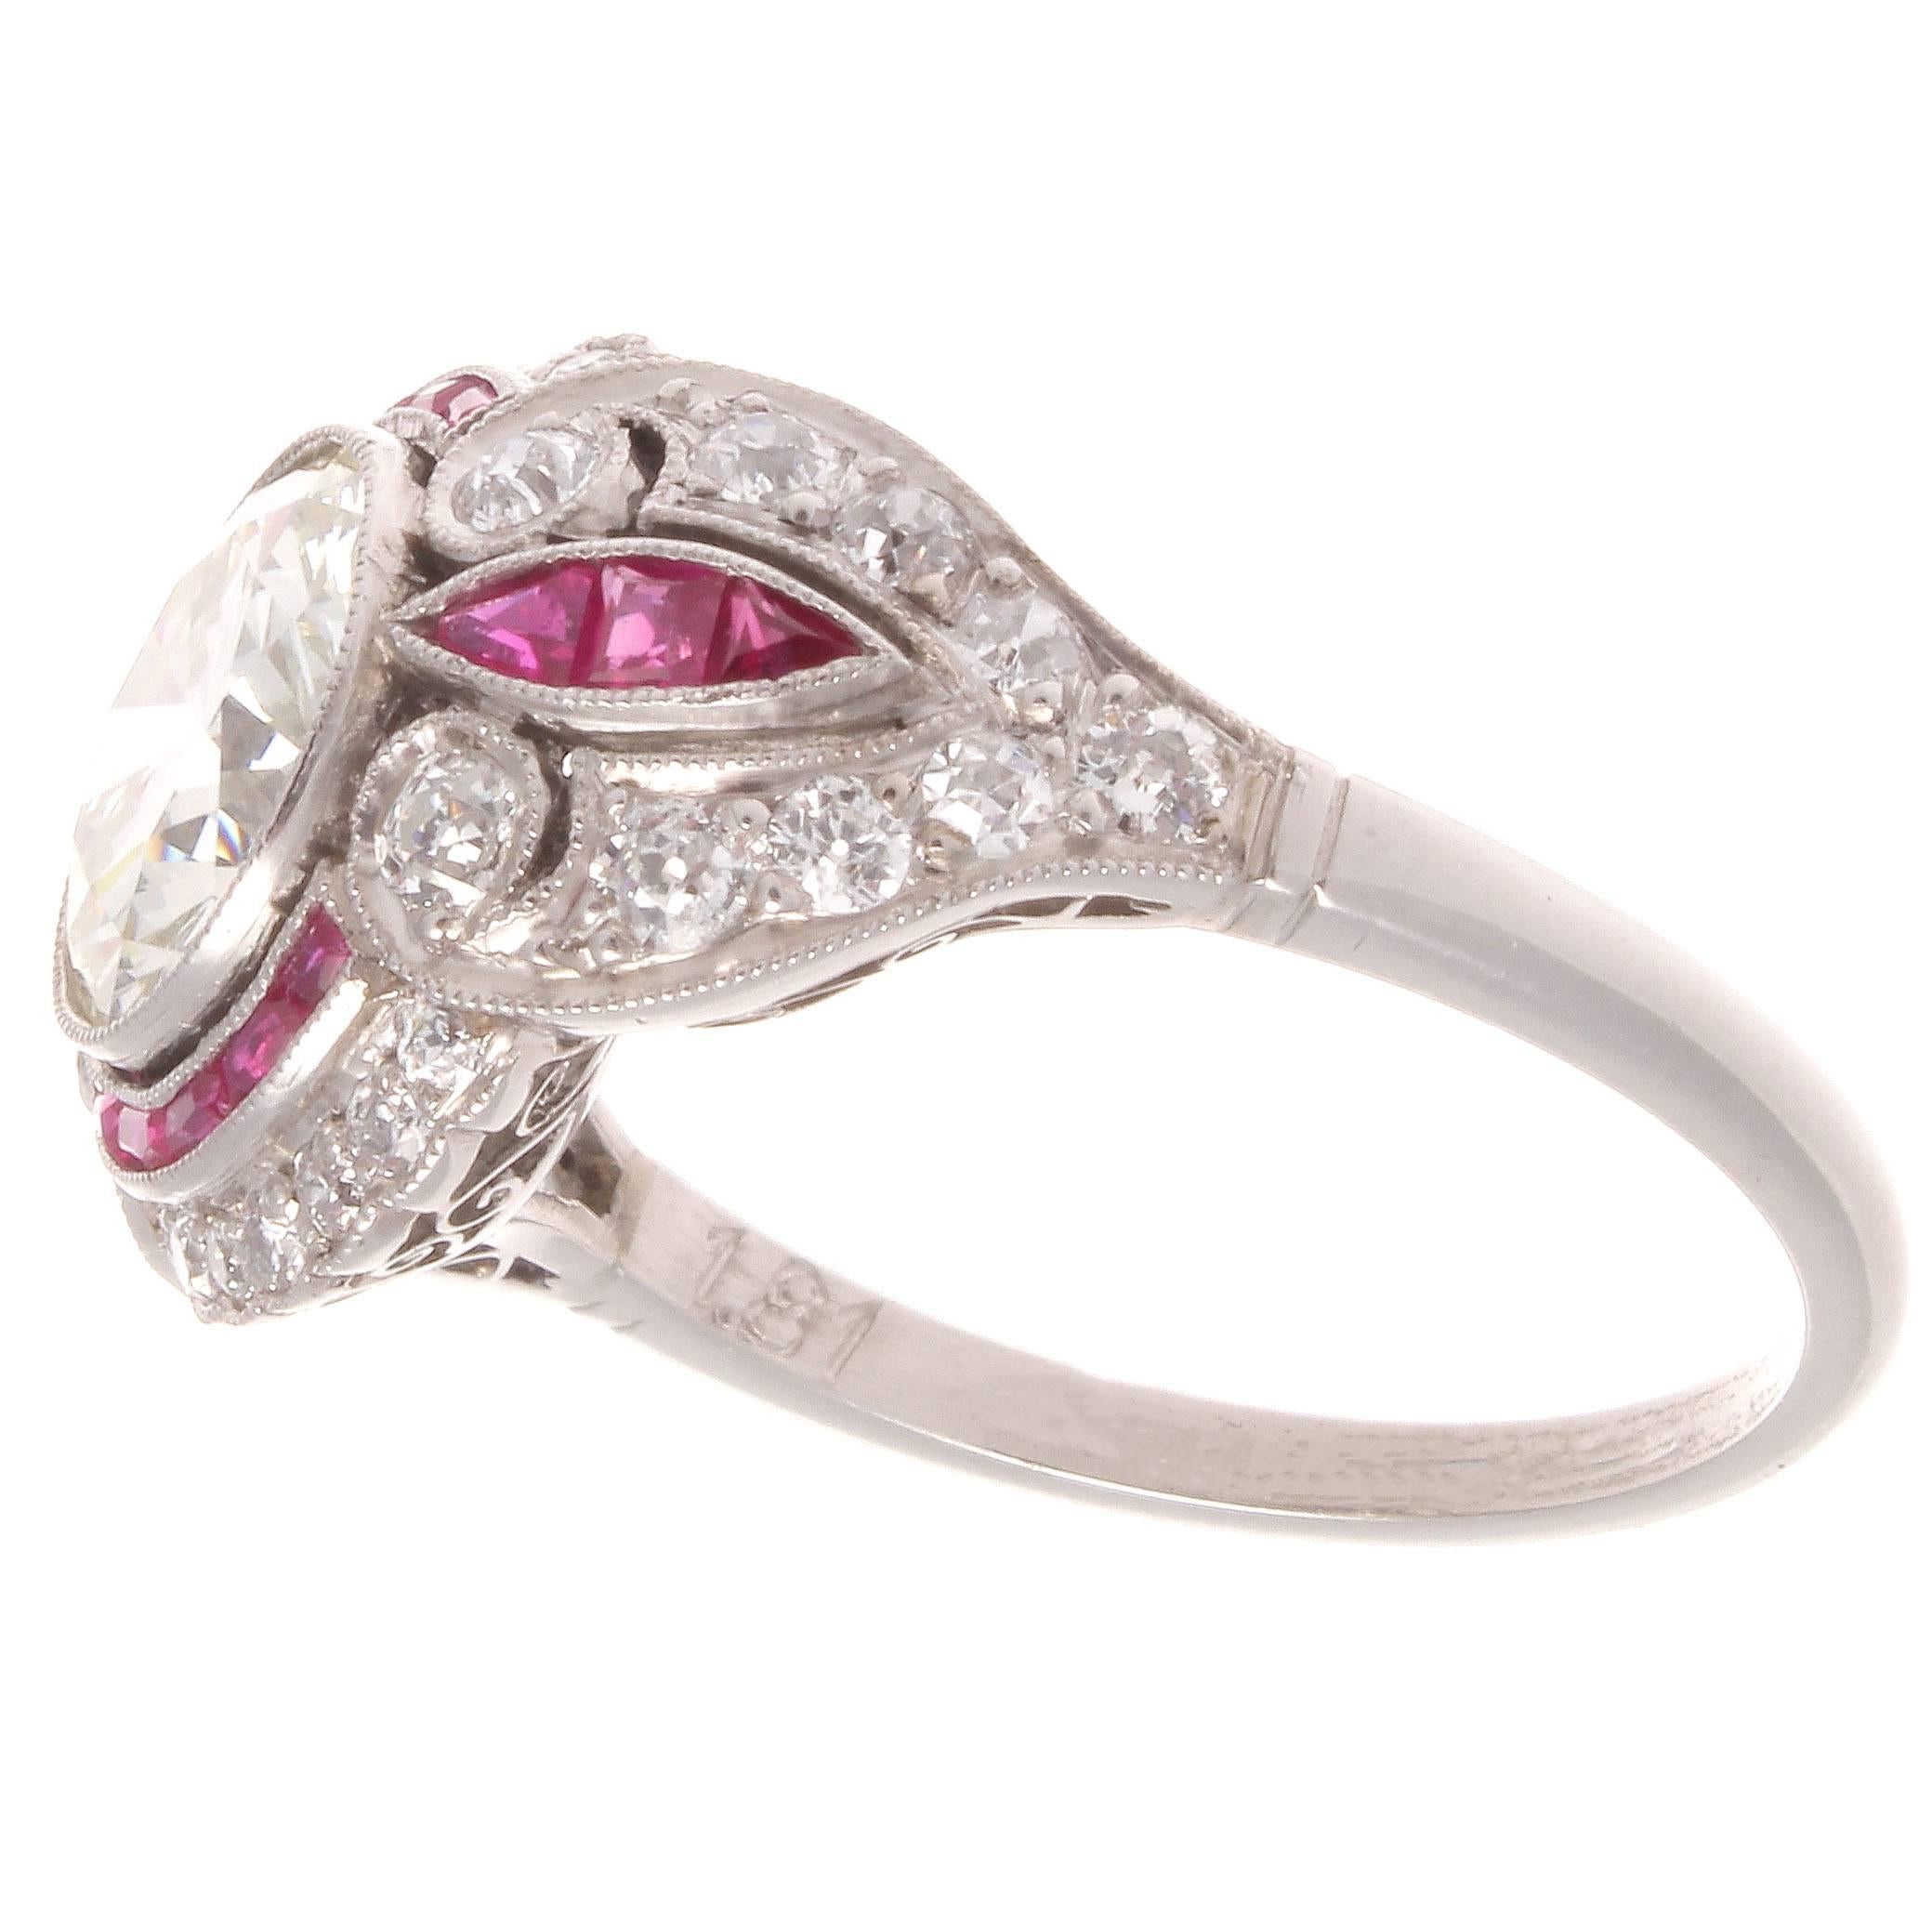 A swirling symphony of color and form. The round cut 1.81 carat diamond is I color and VVS clarity. The accenting diamonds are near colorless and the richly colored rubies add color and vibrancy.

Ring size 6 1/2 and may easily be re-sized to fit.